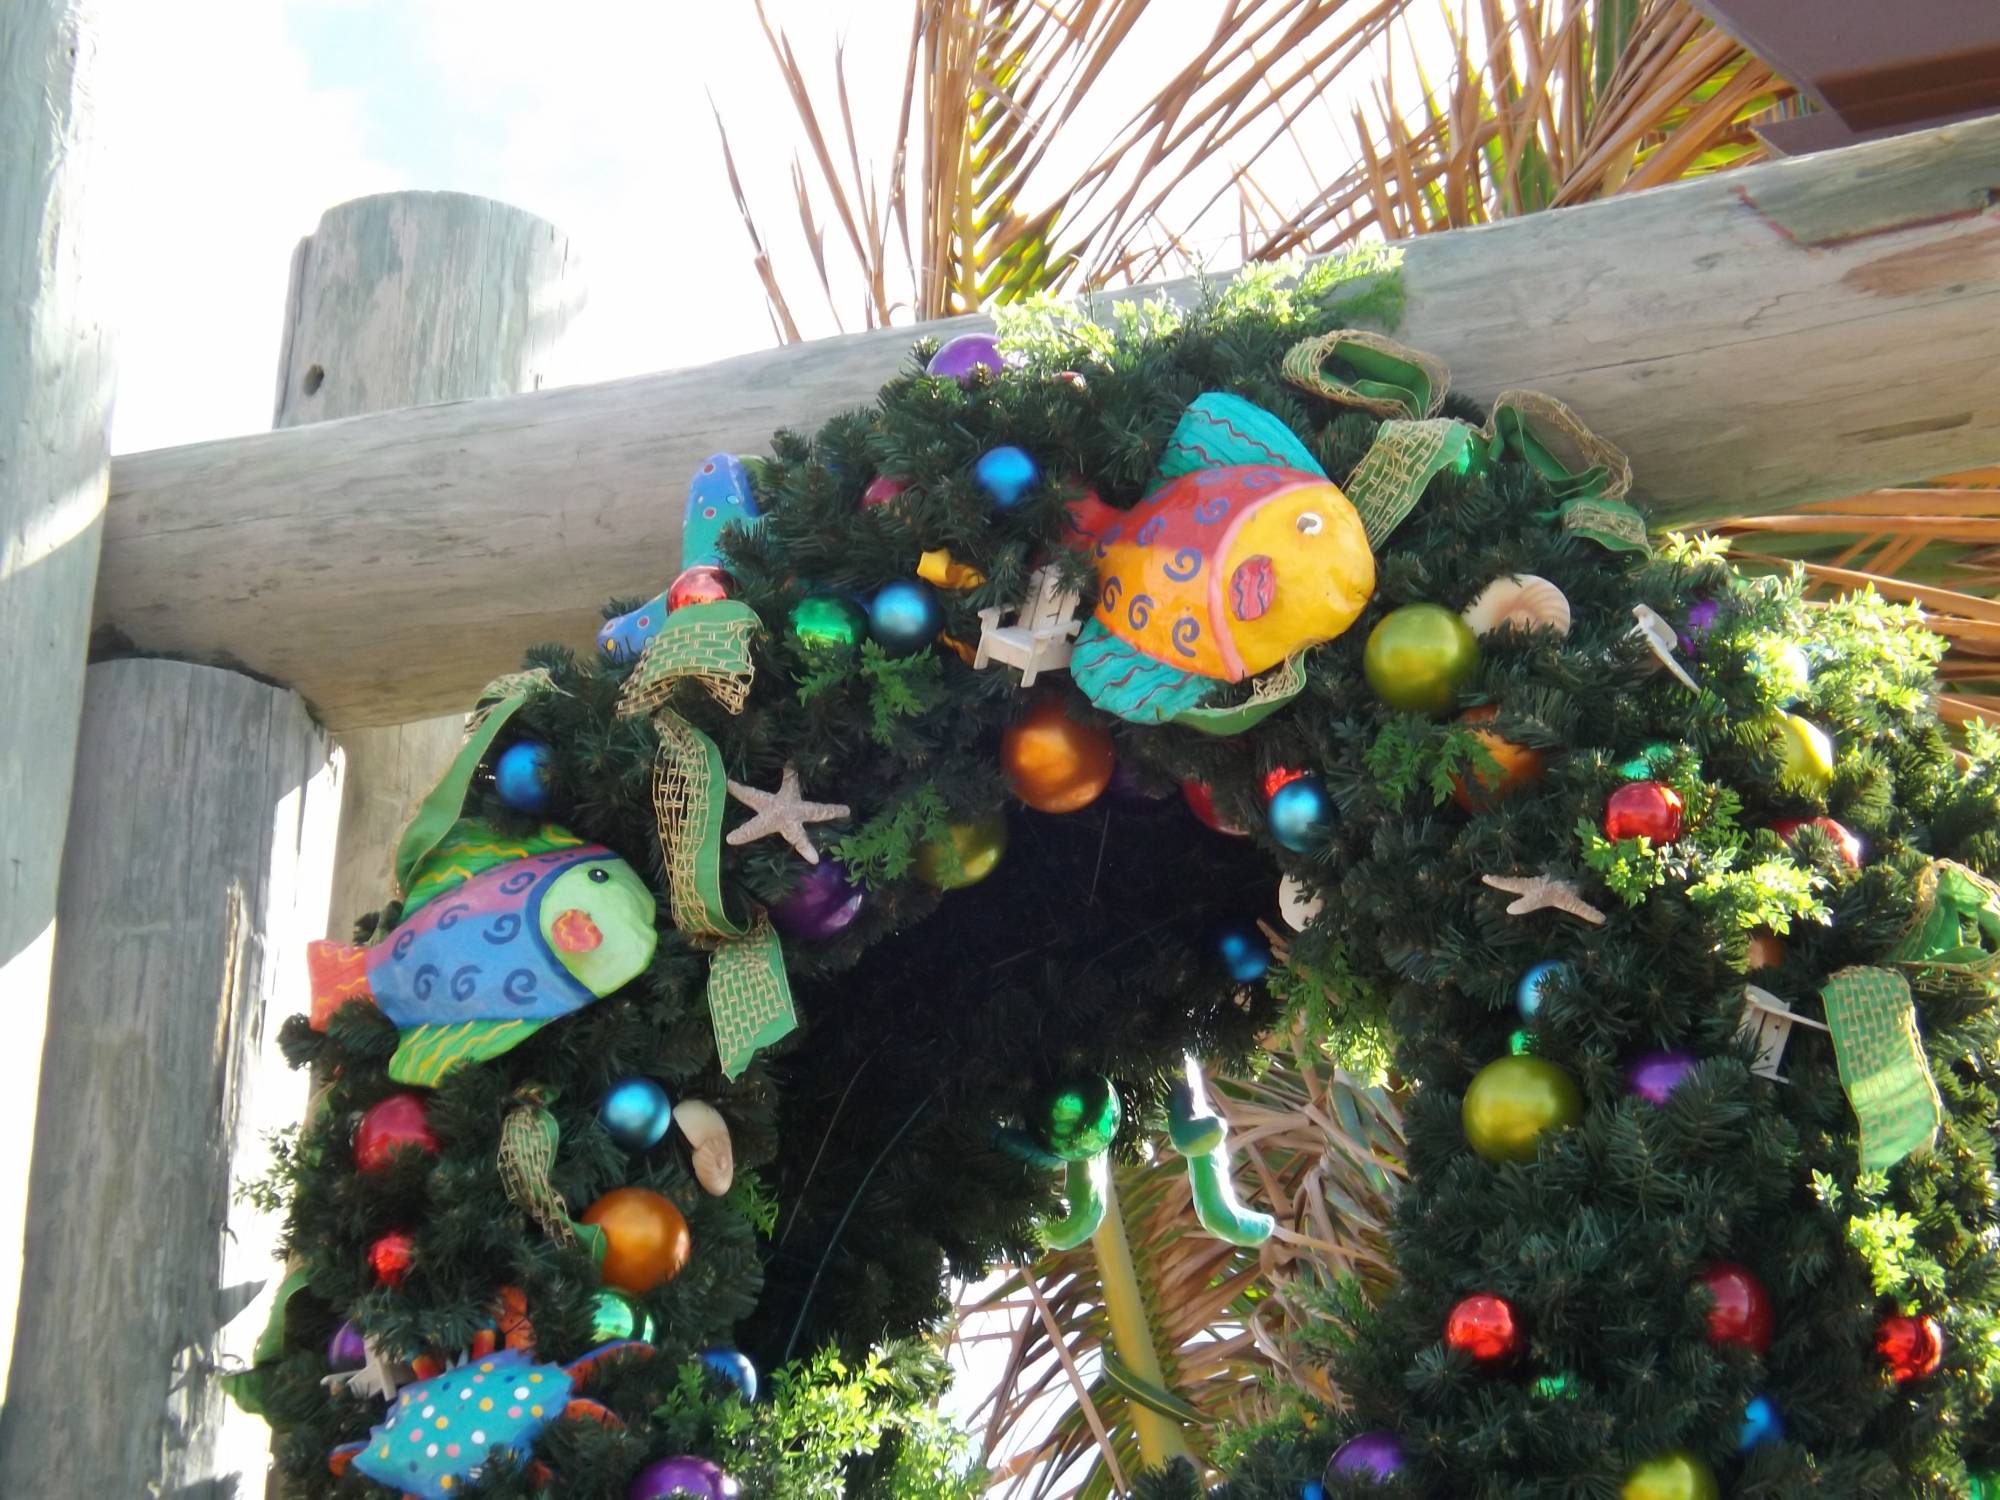 Christmas decorations on Castaway Cay